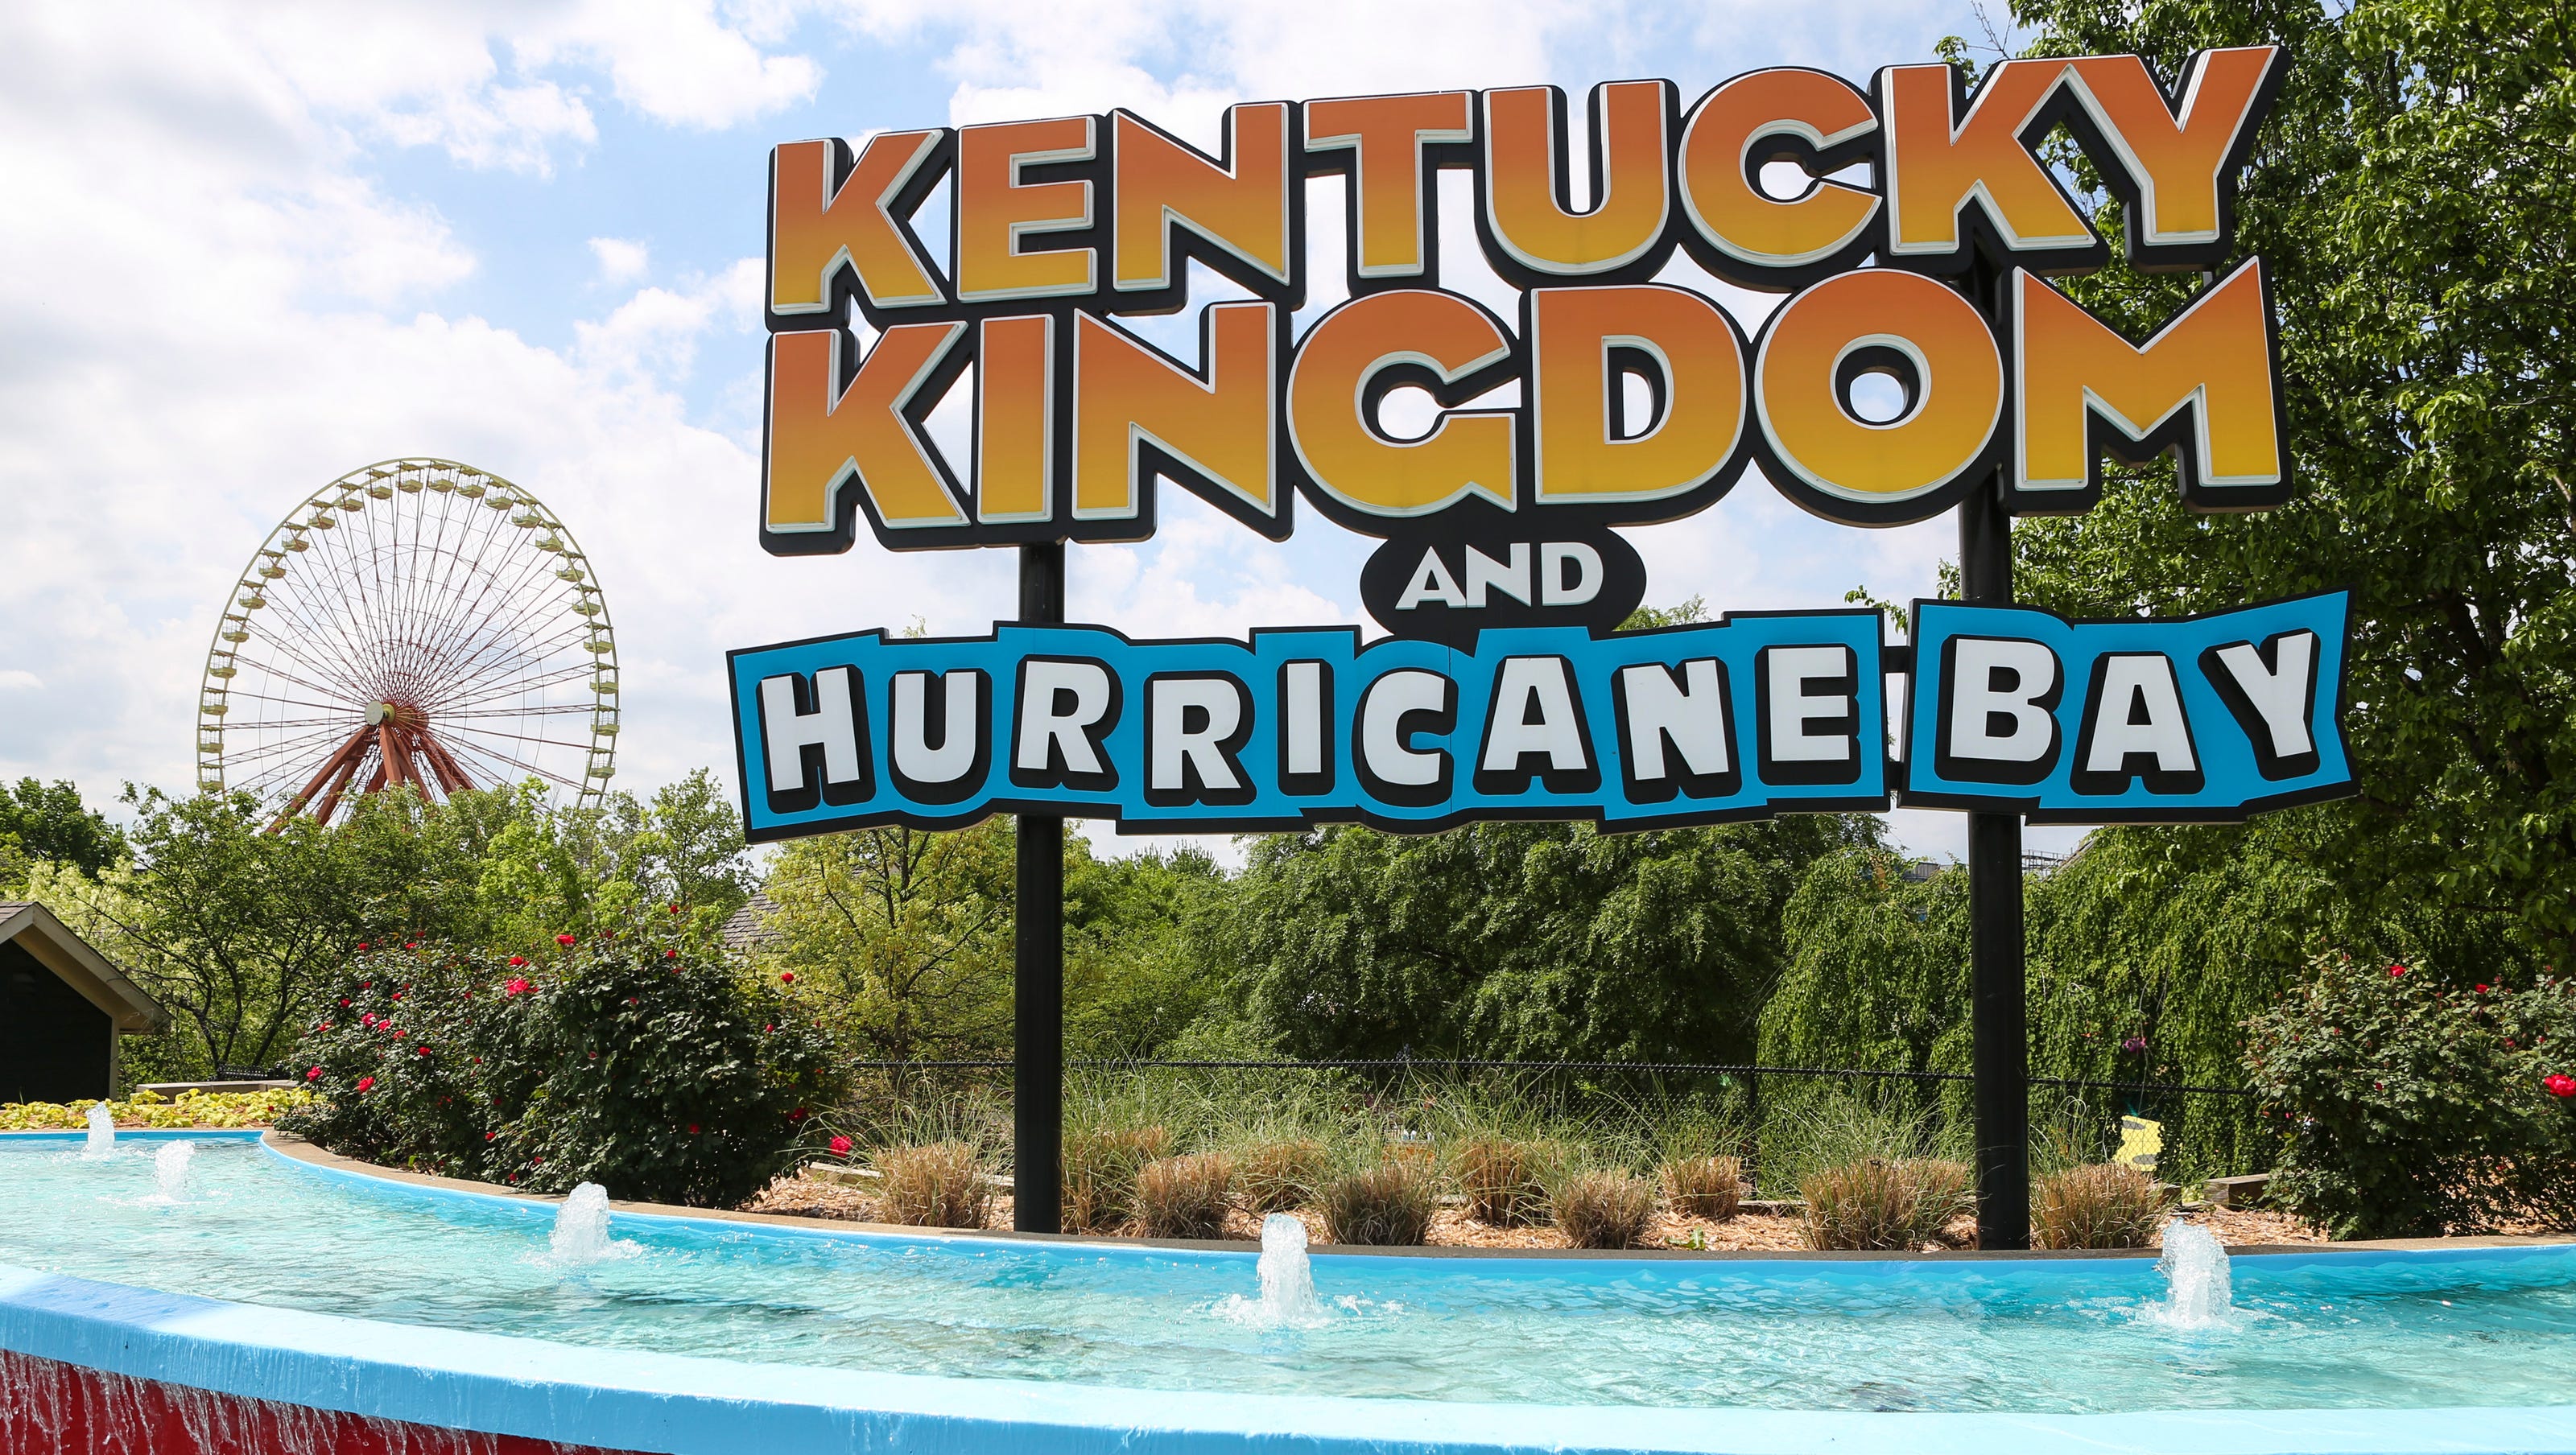 Kentucky Kingdom tickets, rides, prices, food, parking and other FAQ